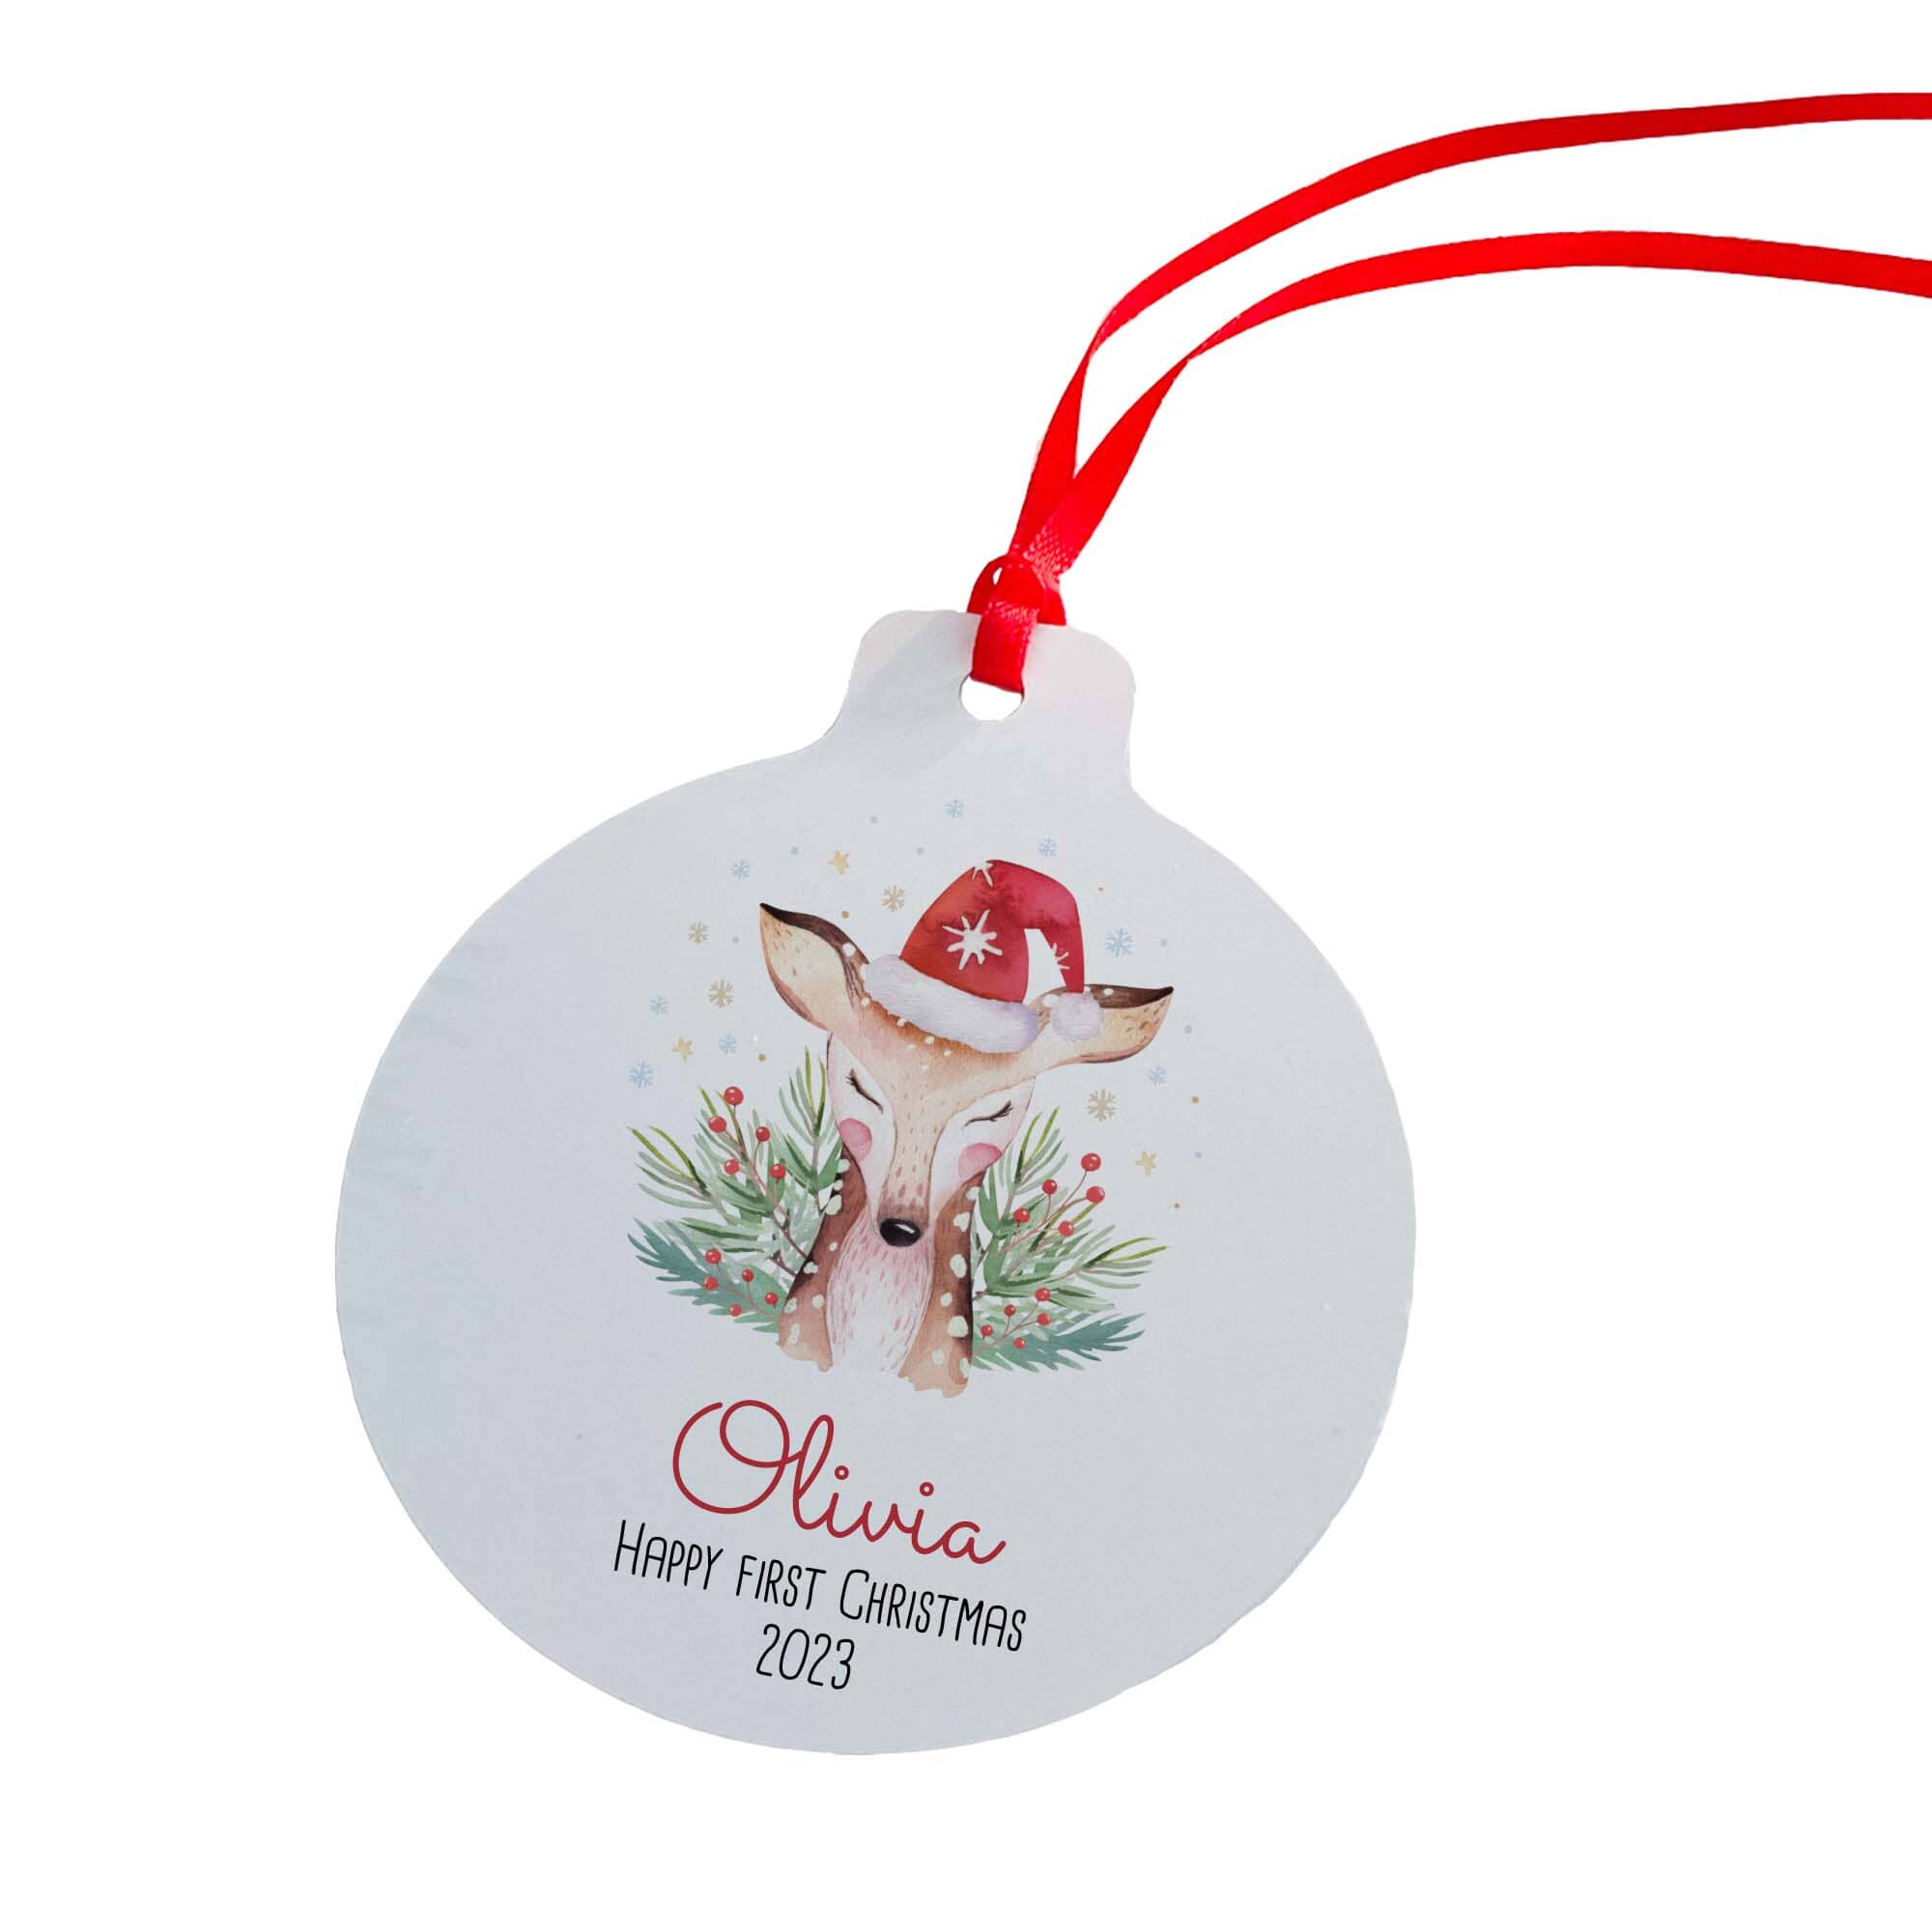 Baby first Christmas tree ornament, Personalised reindeer design with name, My 1st Xmas 2023